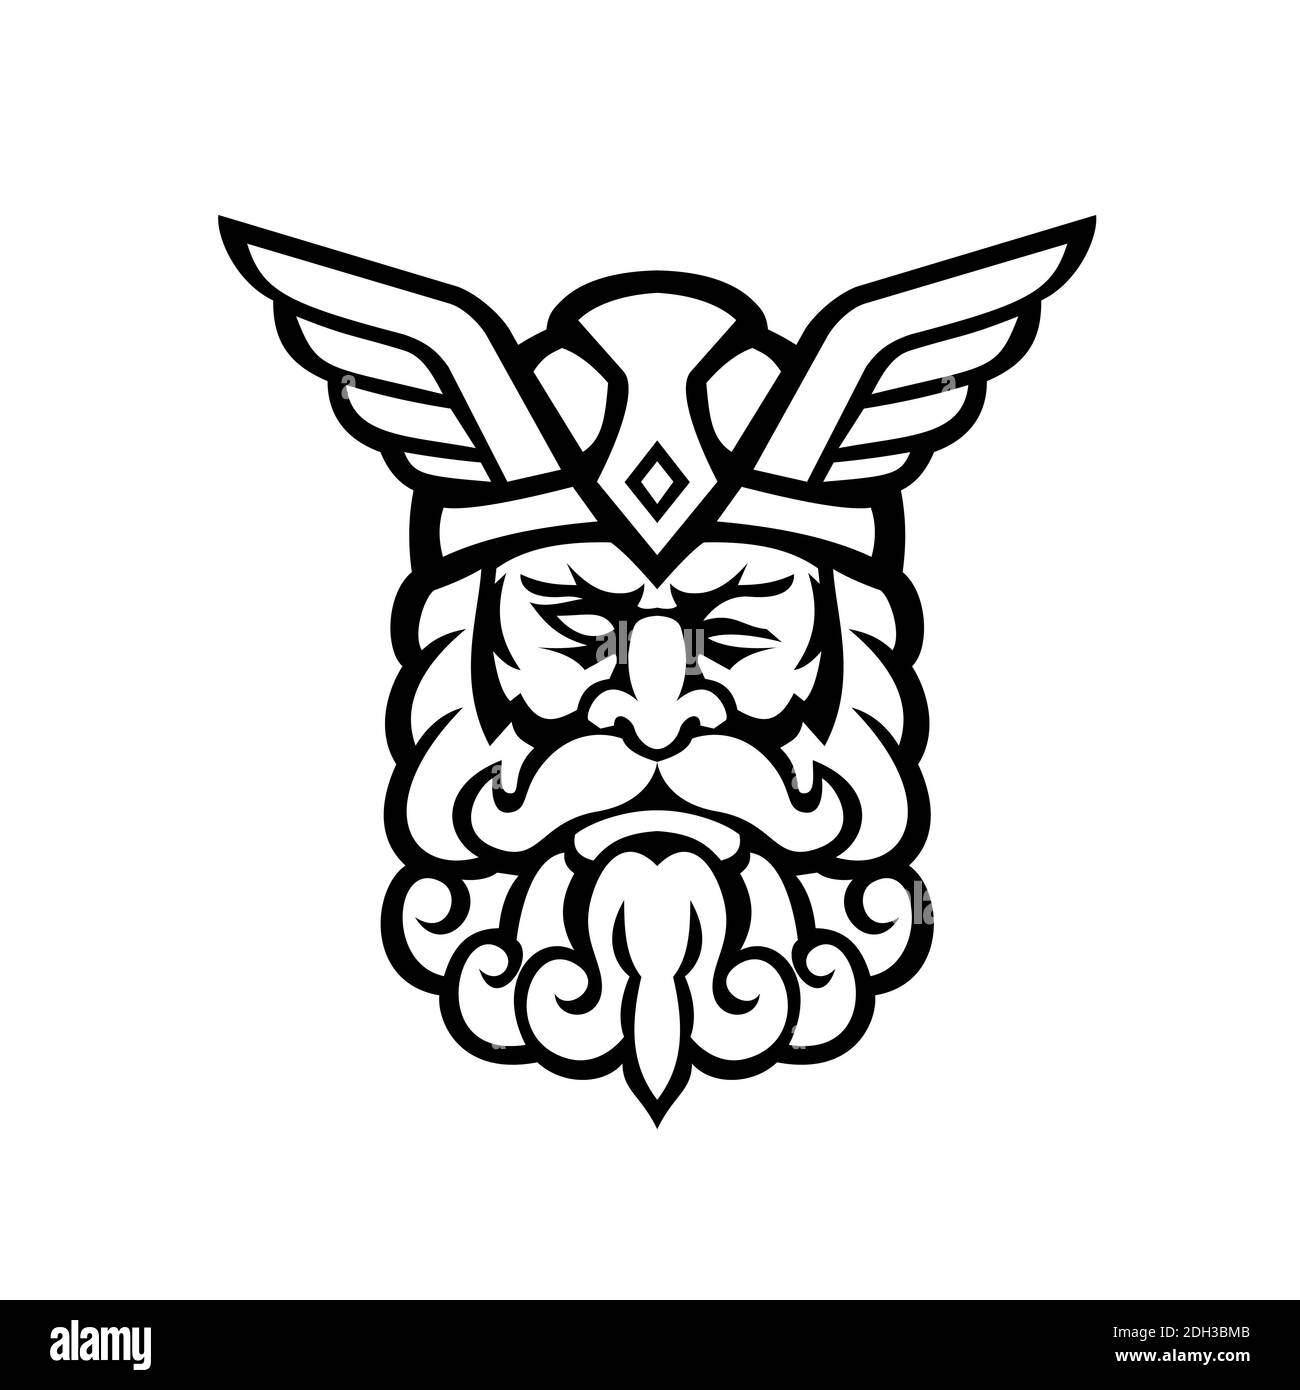 Head of Odin Norse God Front View Mascot Black and White Stock Photo - Alamy